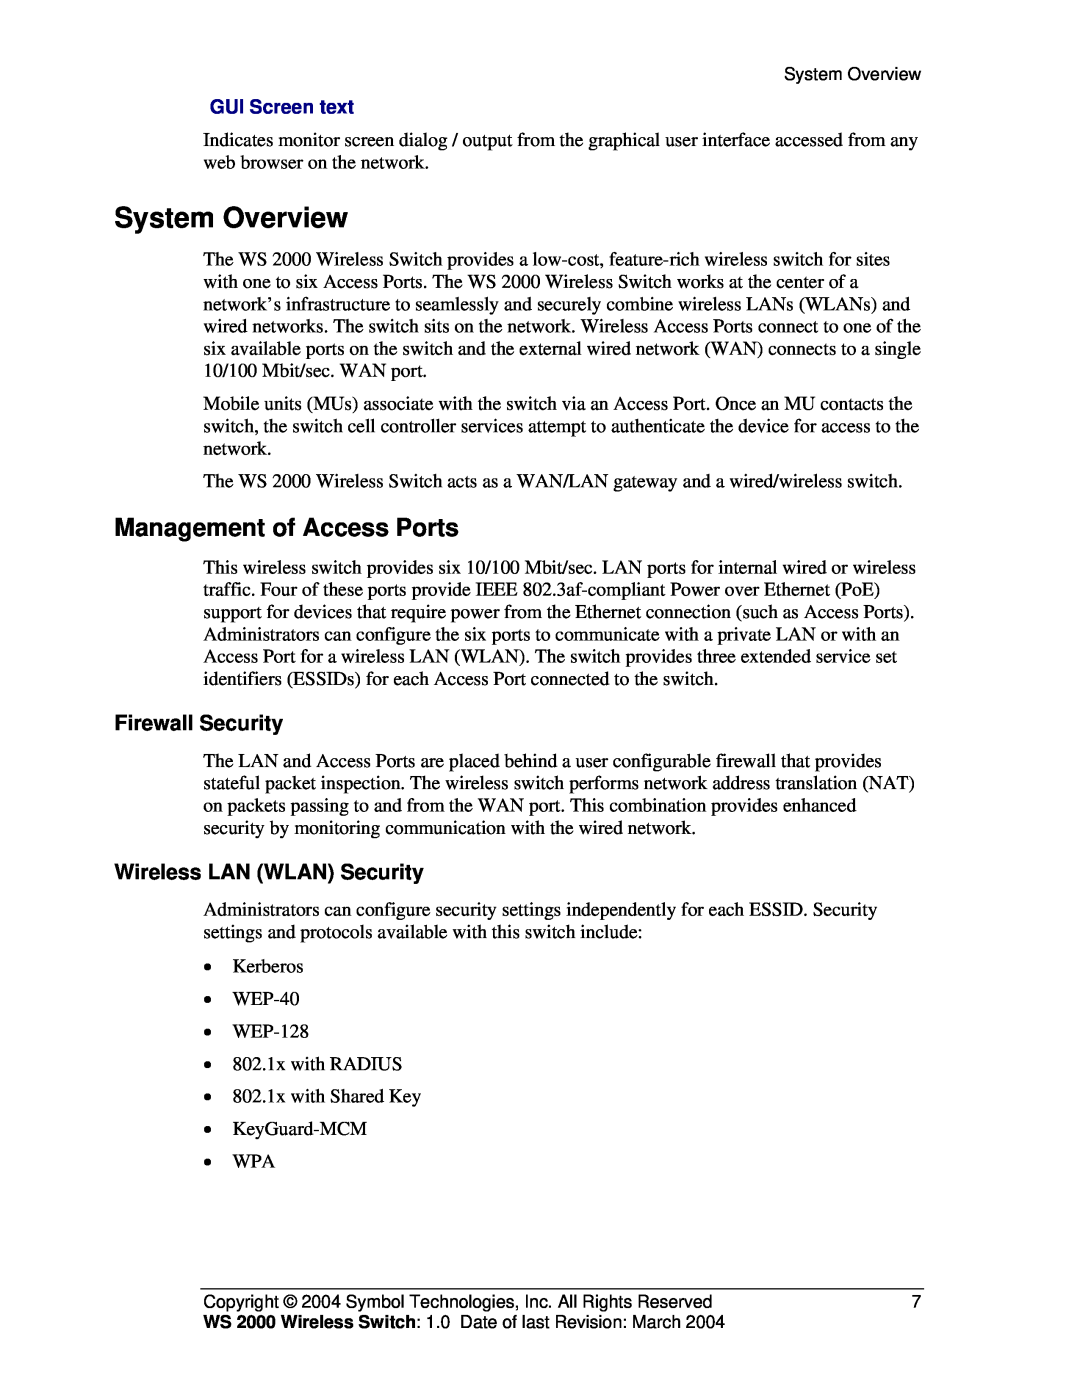 Symbol Technologies WS 2000 System Overview, Management of Access Ports, Firewall Security, Wireless LAN WLAN Security 